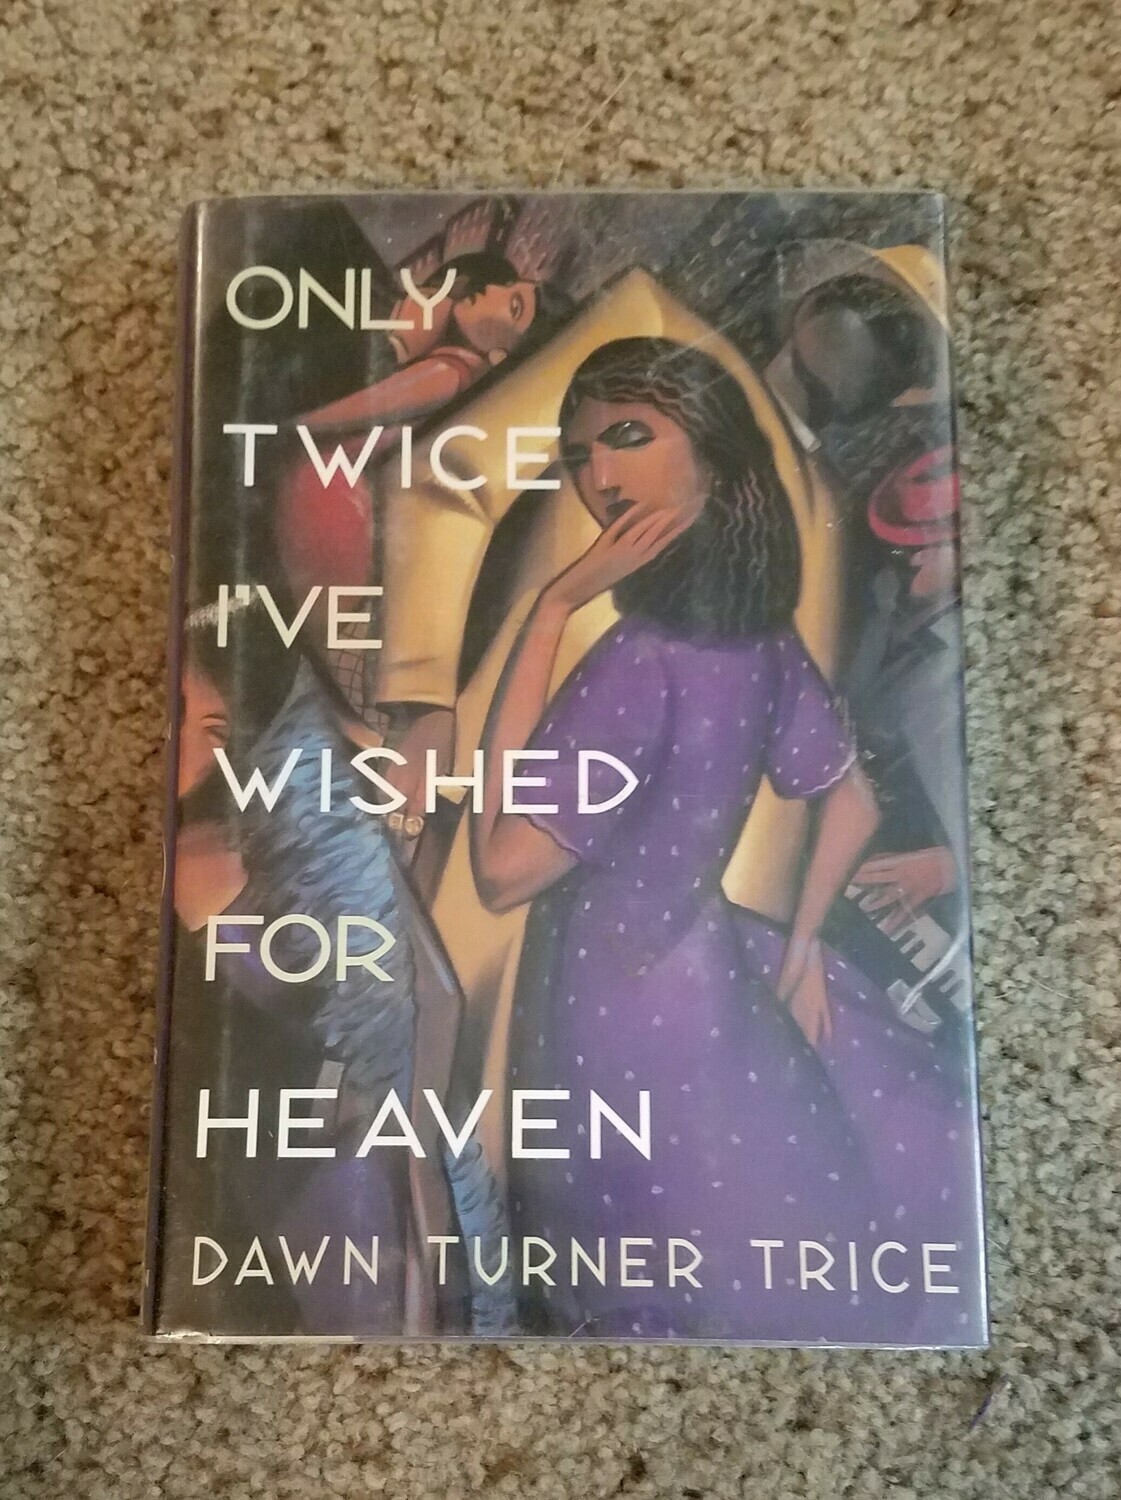 Only Twice I've Wished for Heaven by Dawn Turner Trice